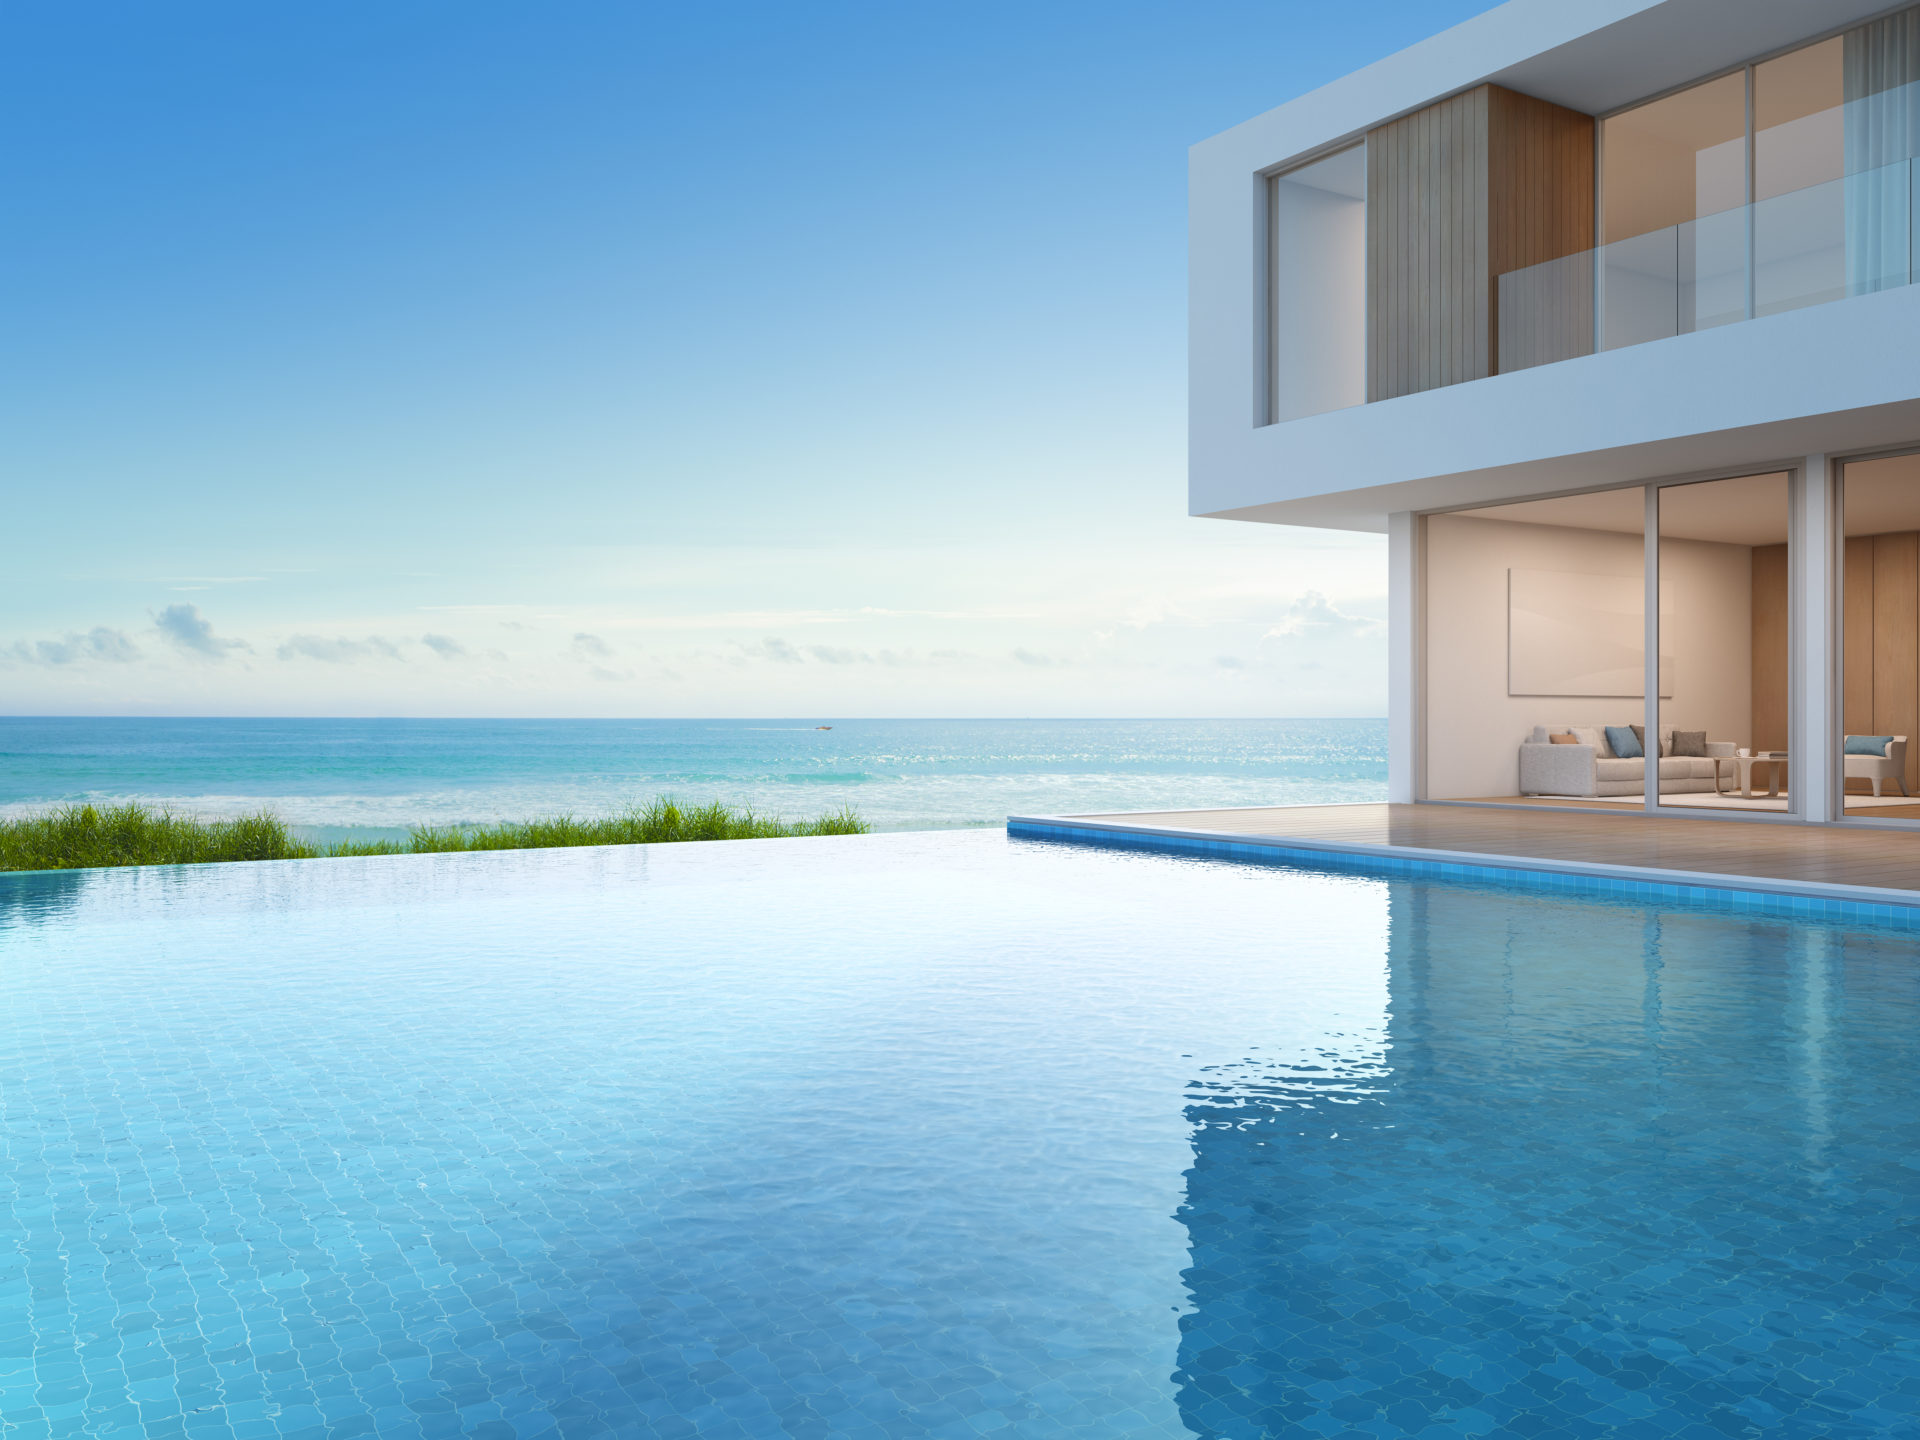 Luxury beach house with sea view swimming pool in modern design, Vacation home for big family